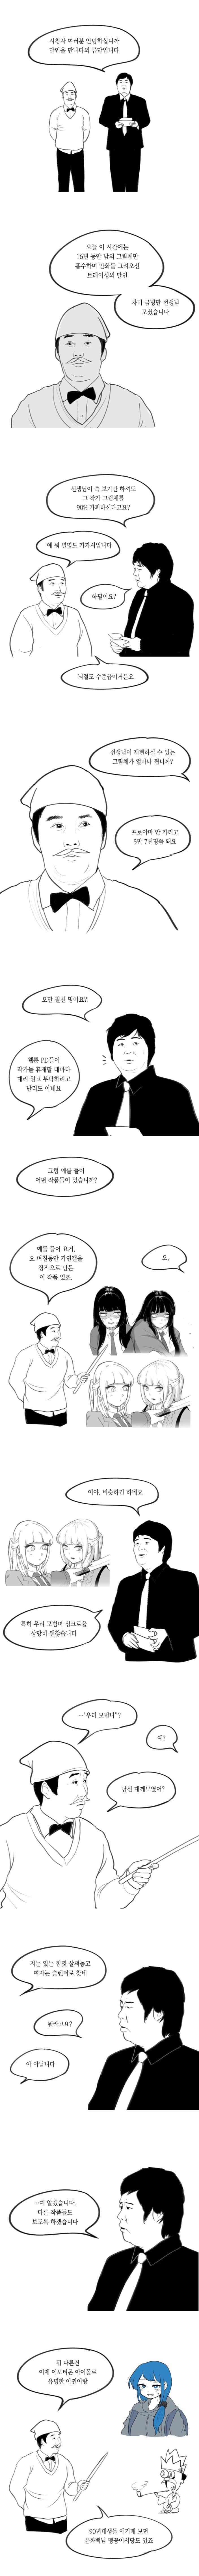 Only the master of tracing, manhwa.